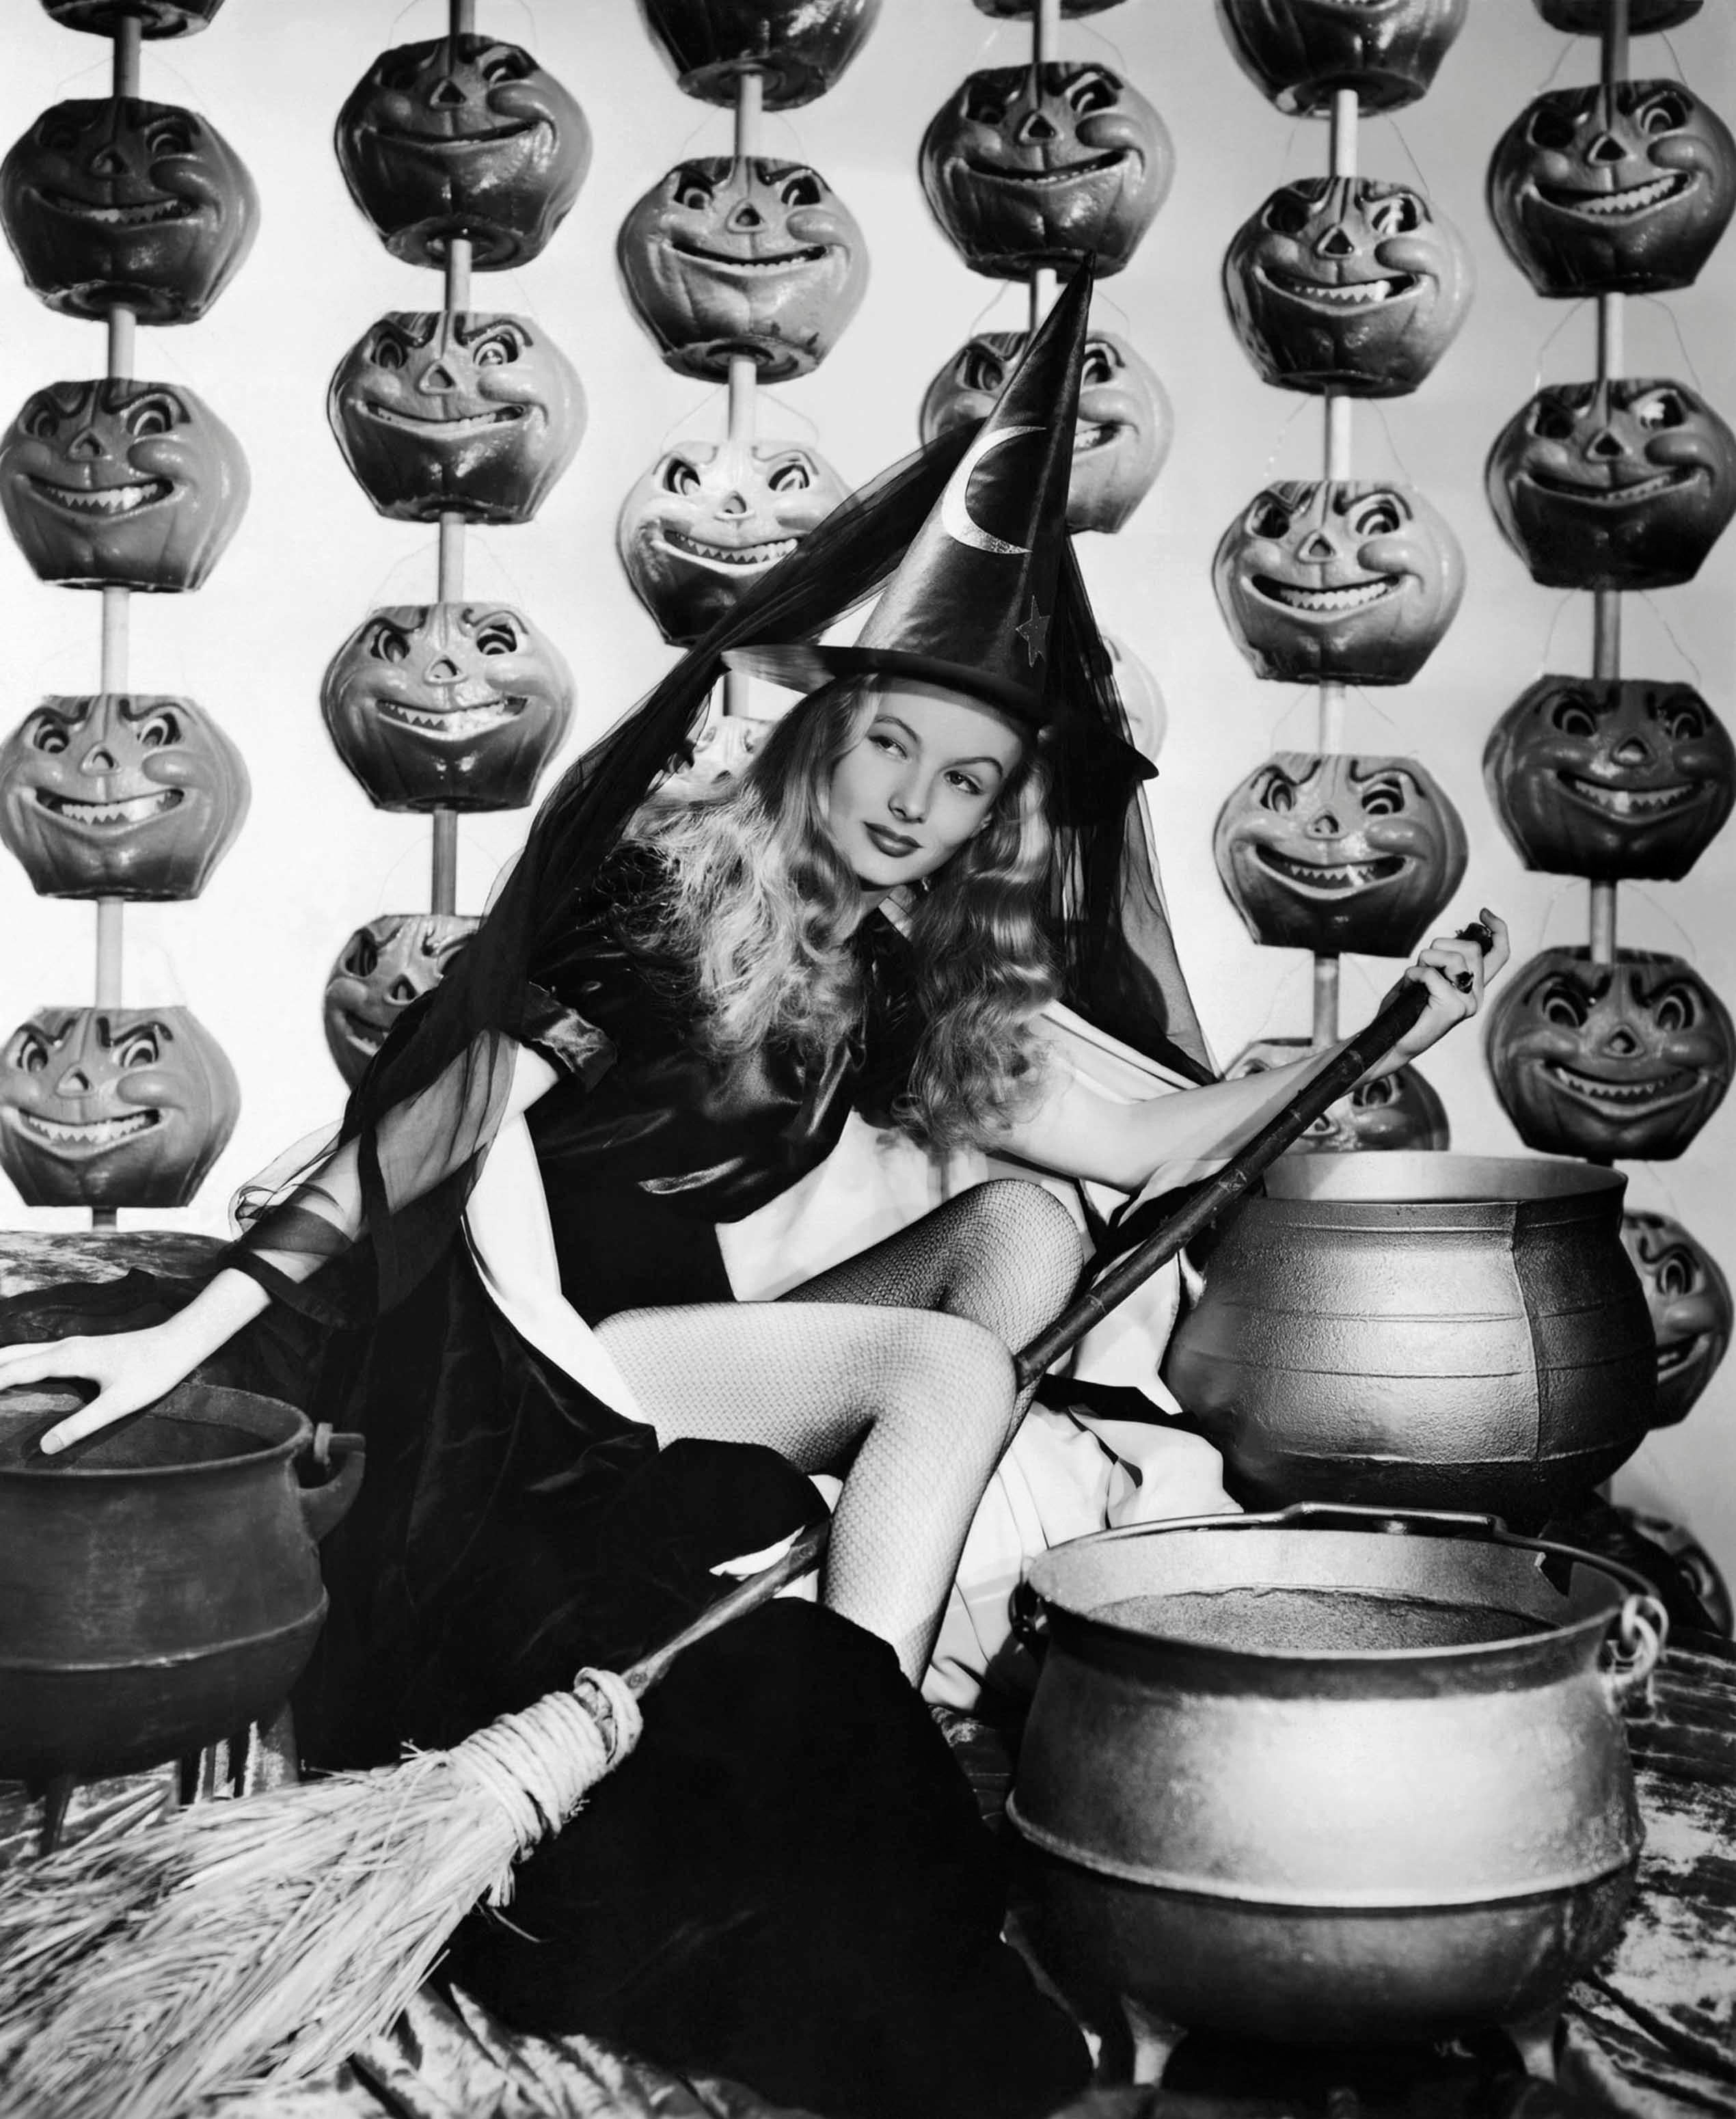 Unknown Black and White Photograph – Veronica Lake "I Married a Witch" Globe Photos Fine Art Print